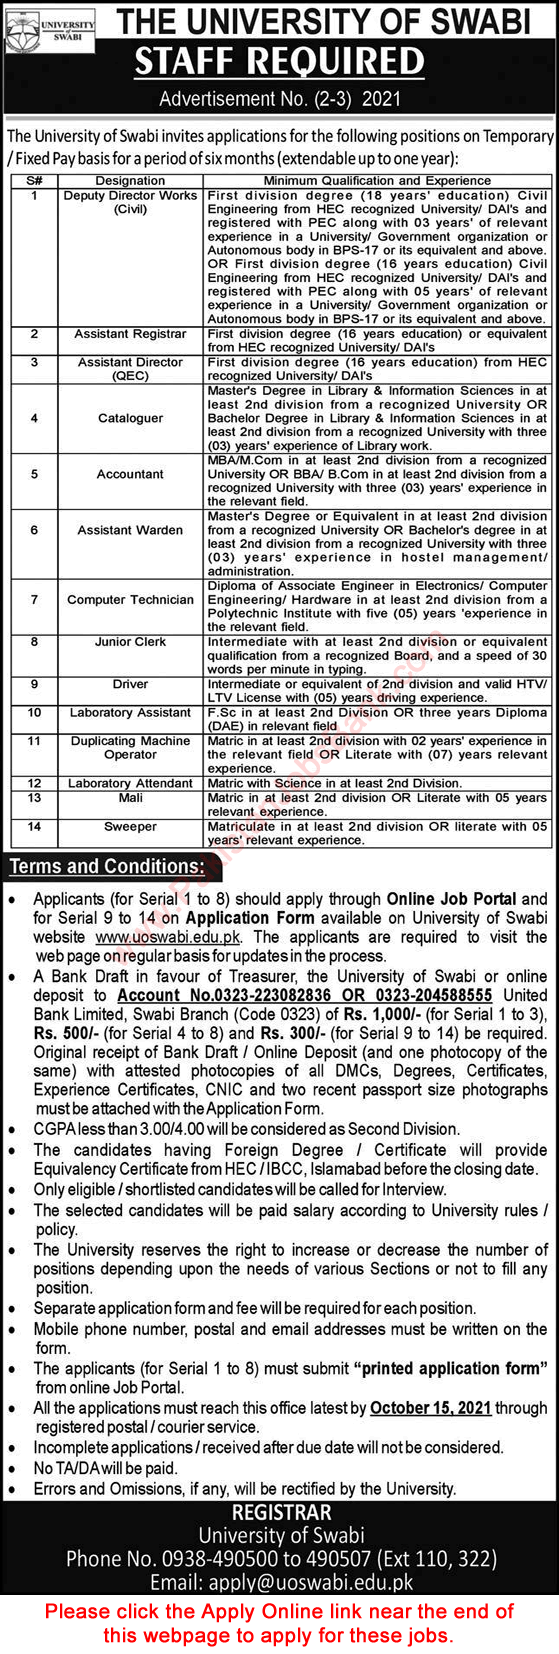 University of Swabi Jobs October 2021 Apply Online Lab Assistants & Others Latest